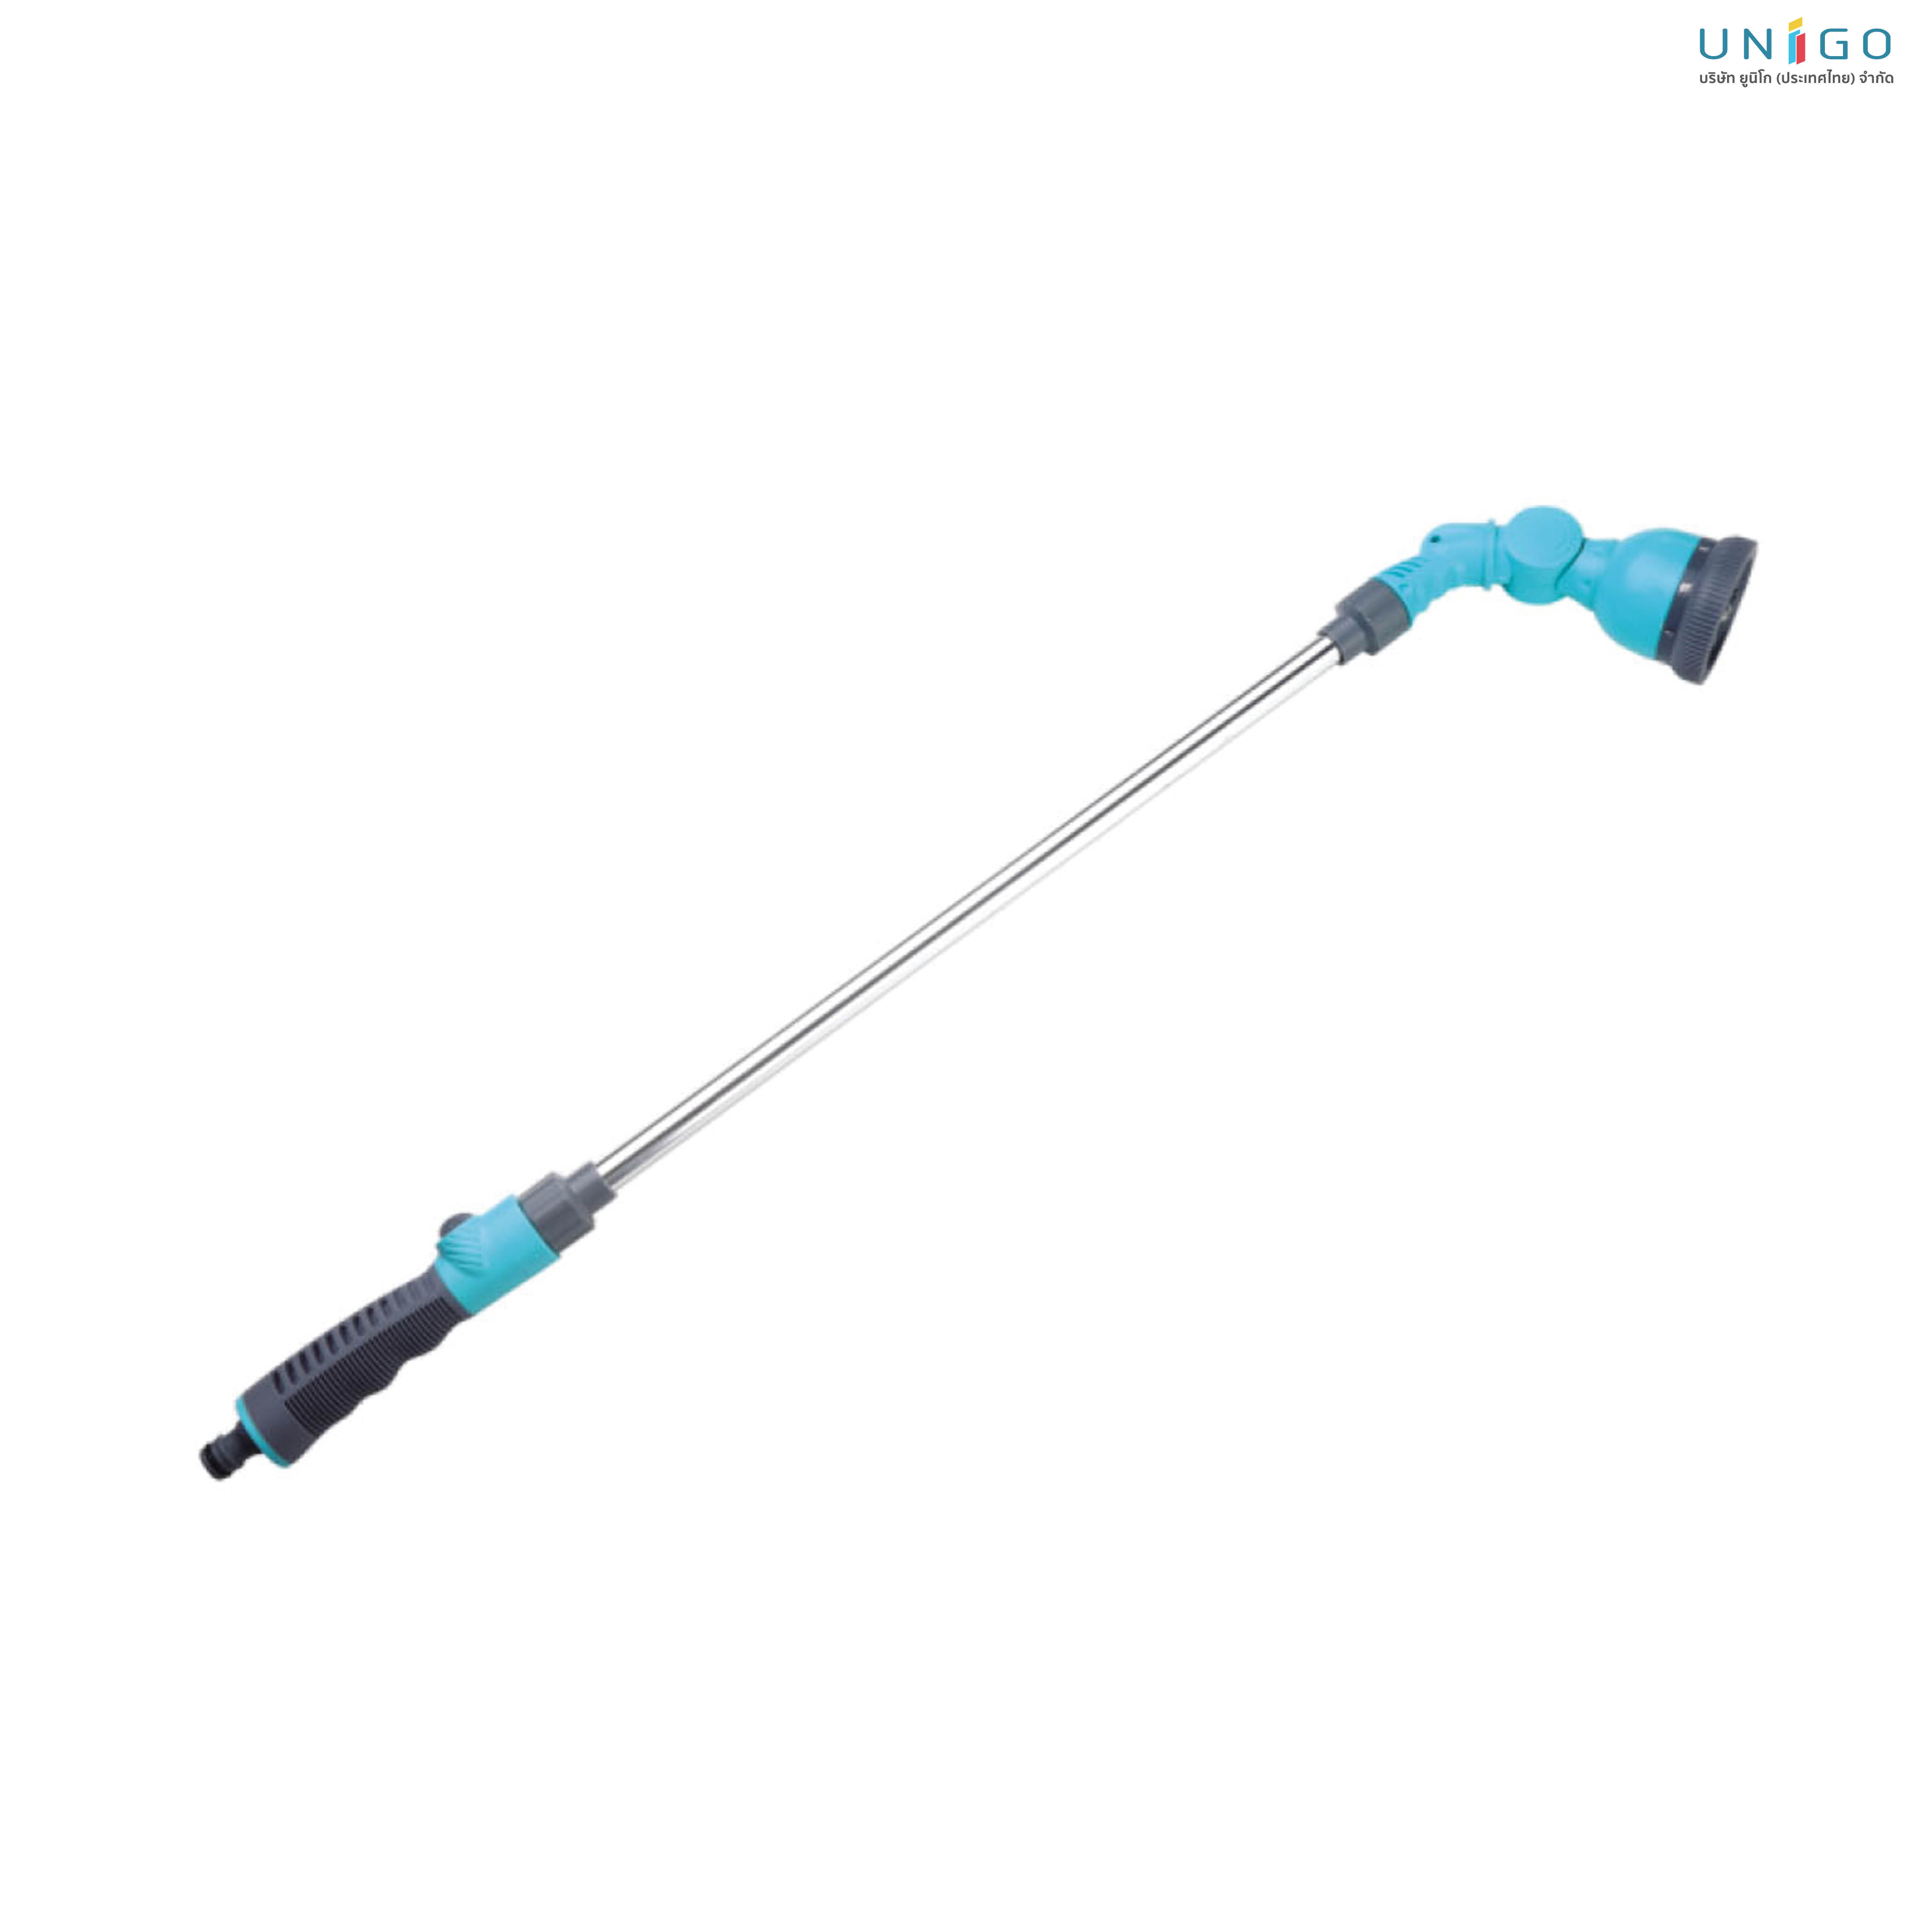 28 in. 8 PATTERN WATERING WAND  WITH FLOW CONTRAL8-PATTERN